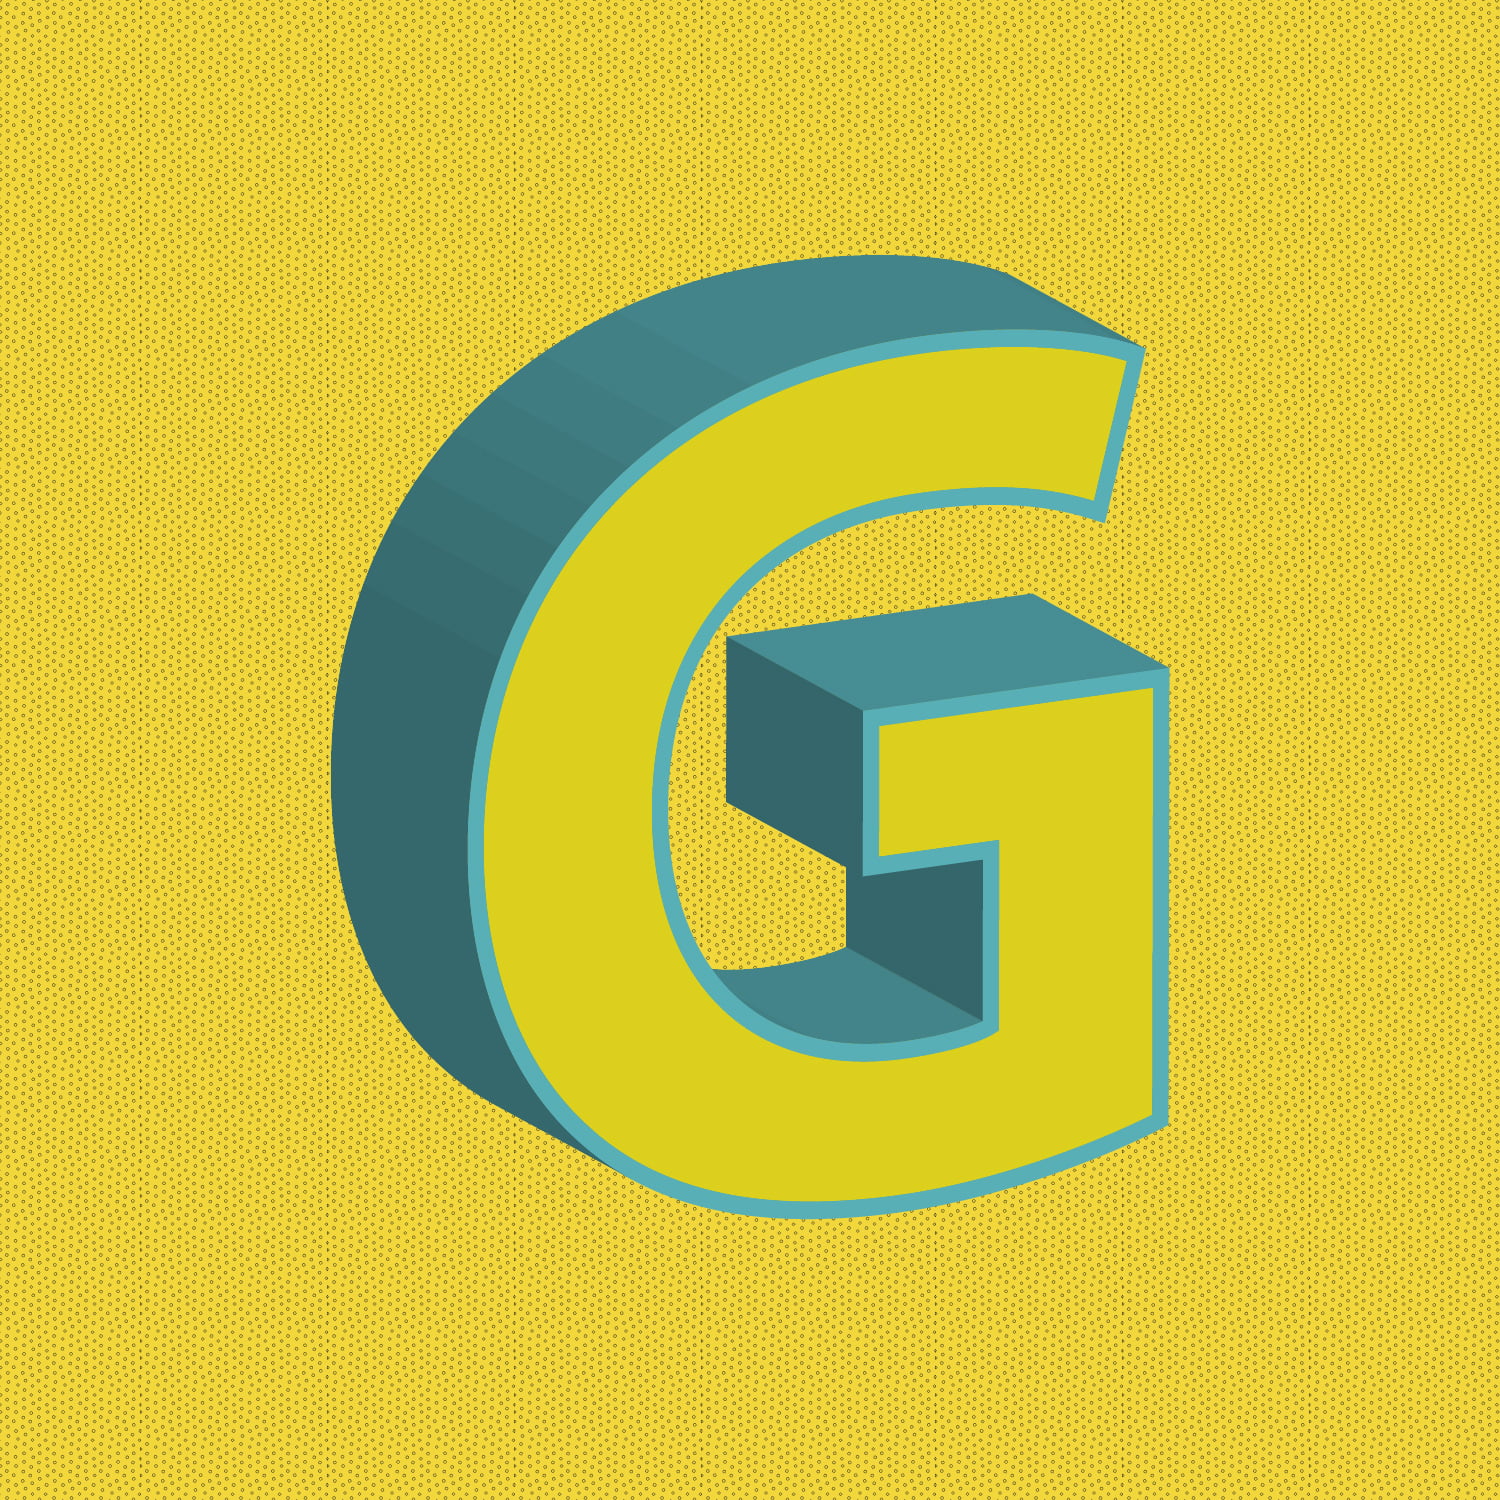 3D Yellow Letter G With Blue Border – Typostock